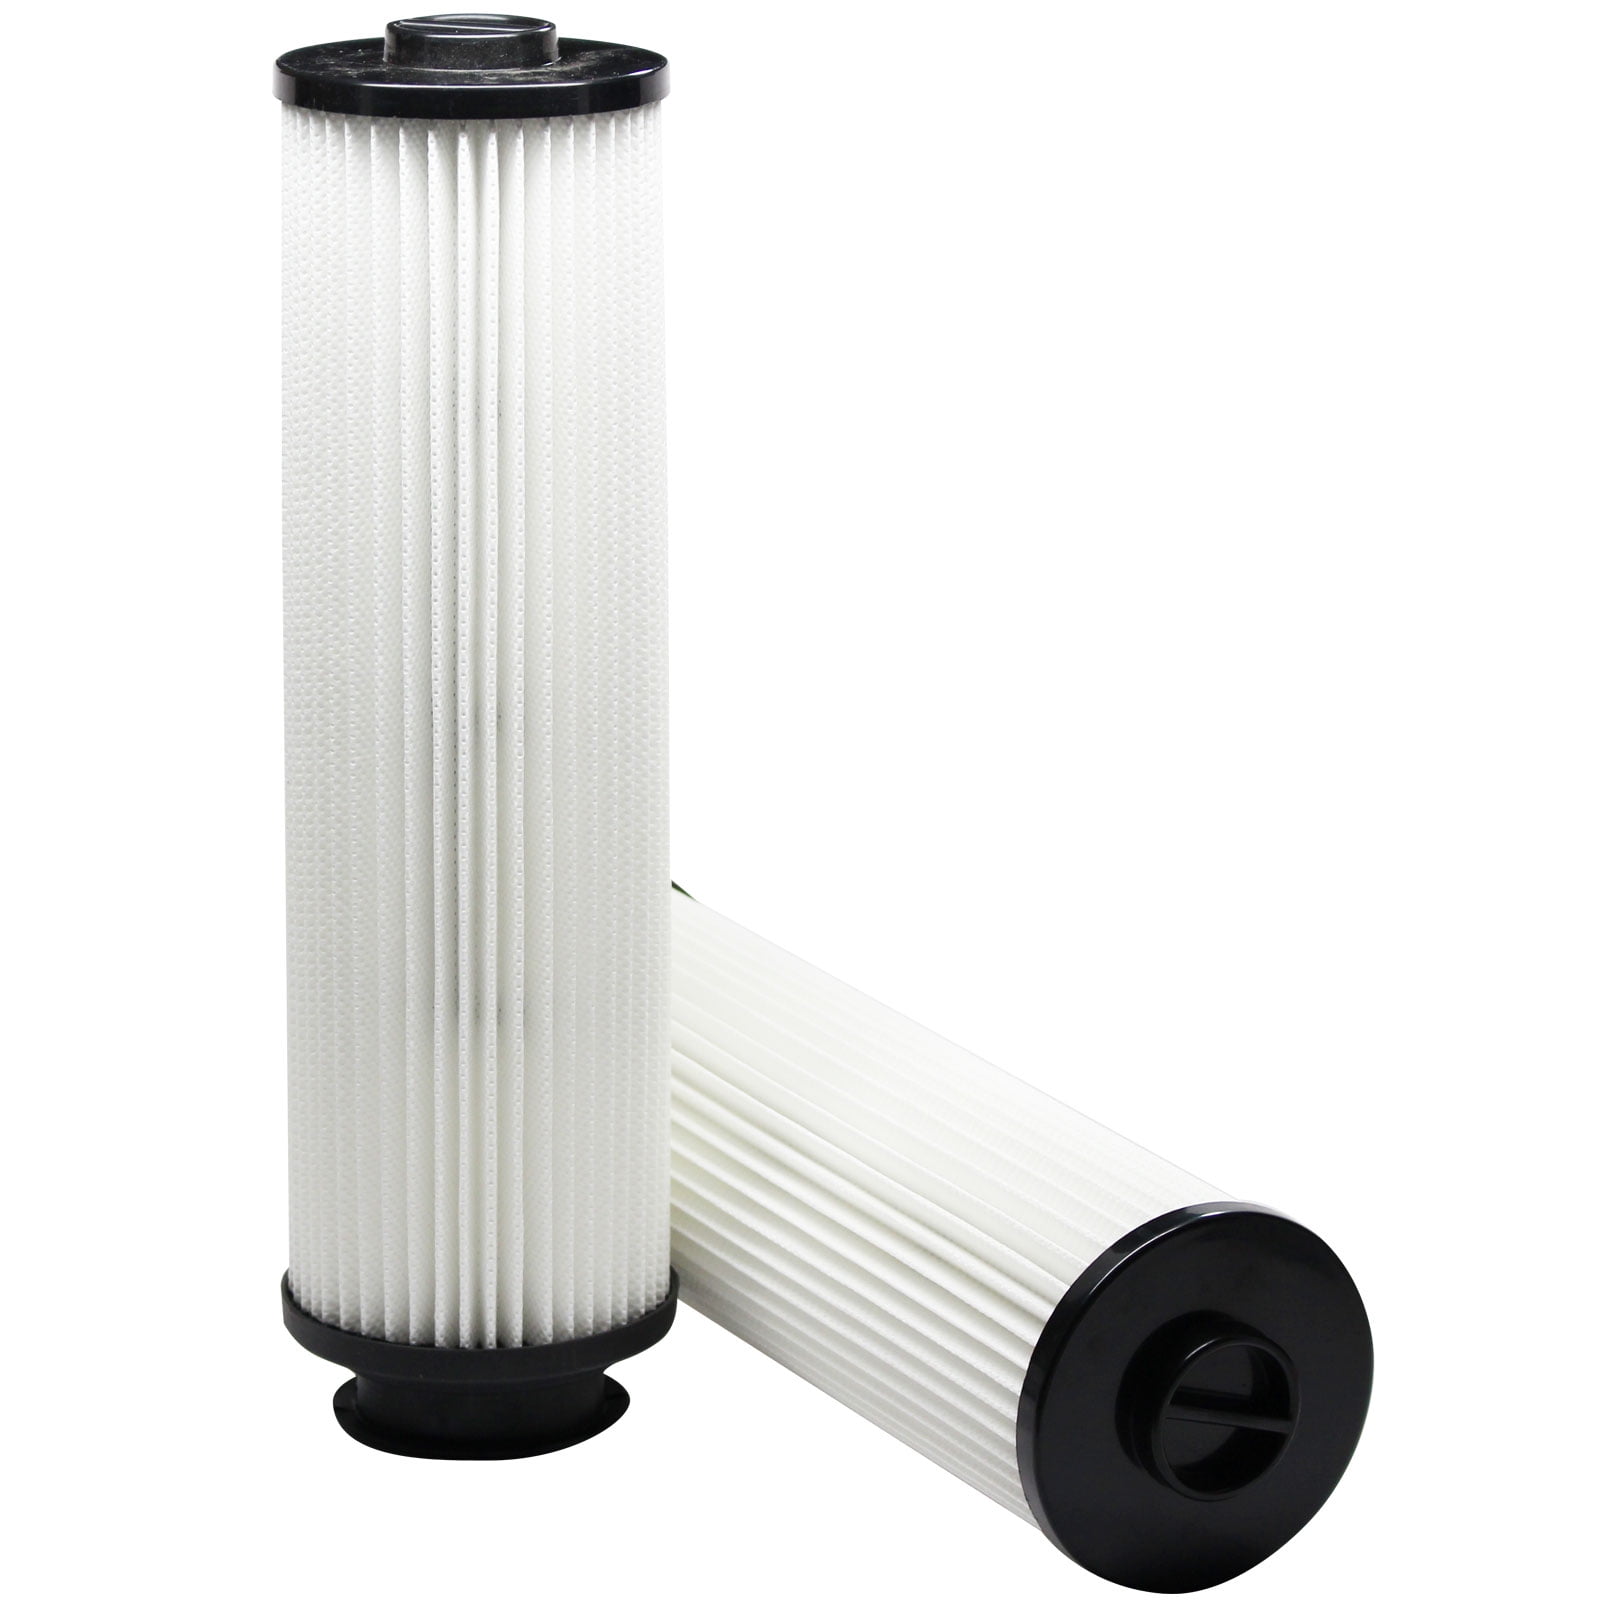 ZVac Hoover Windtunnel 43611042 Washable HEPA Filters 2 Pack 